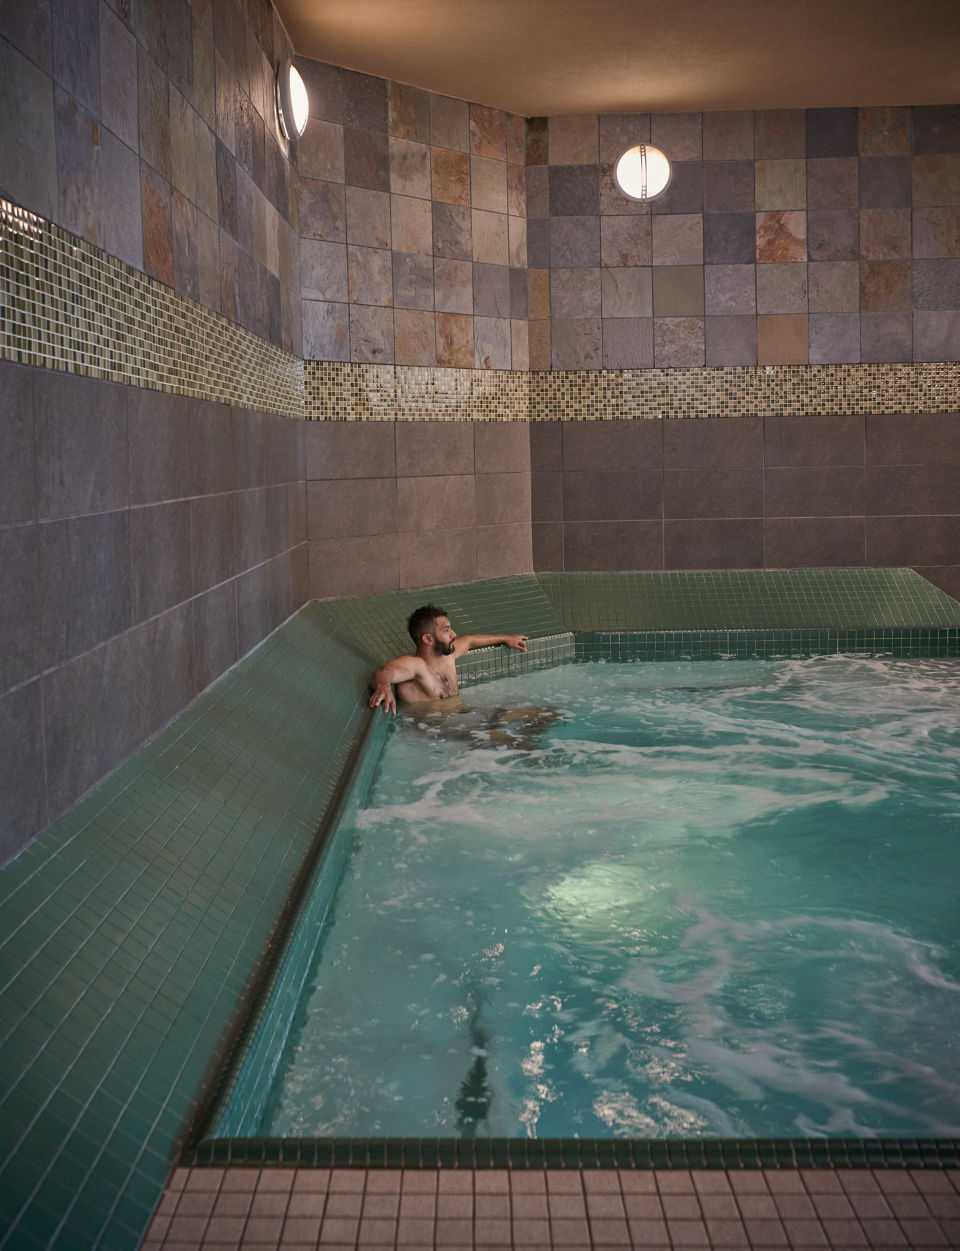 A man sitting and relaxing in an indoor whirlpool at the Life Time South Austin club location